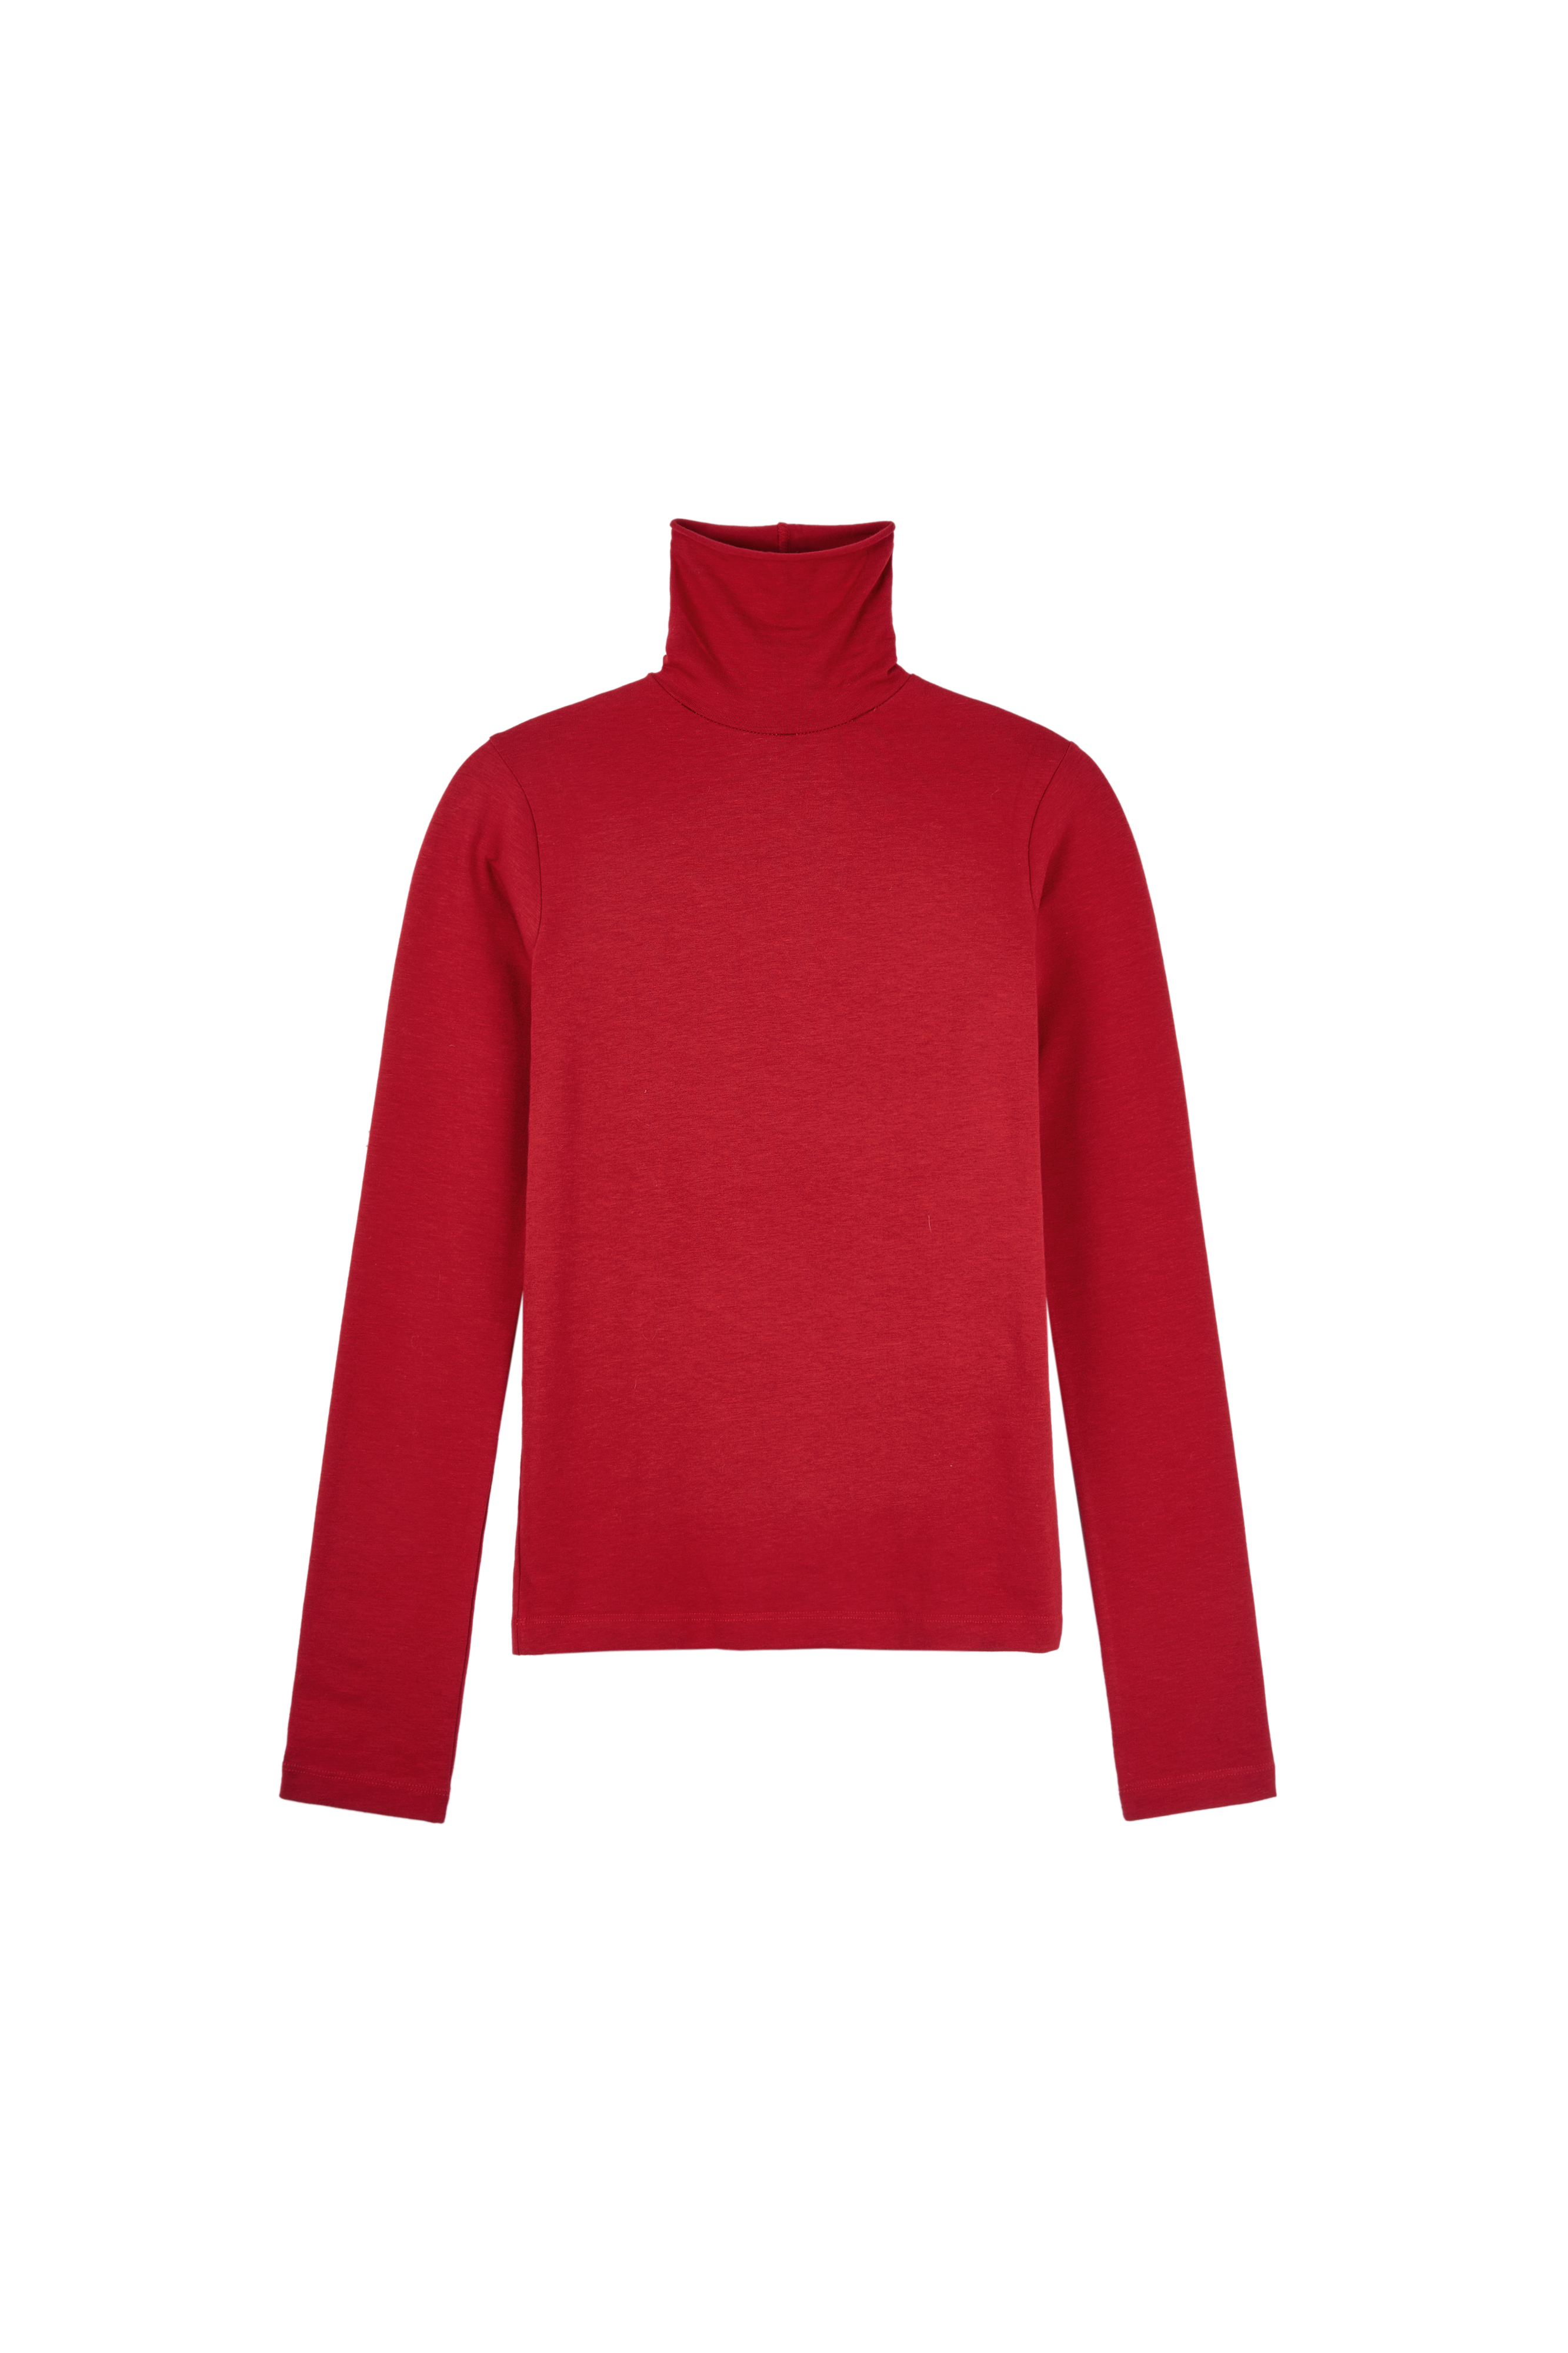 WINTER TURTLENECK T-SHIRTS (RED)